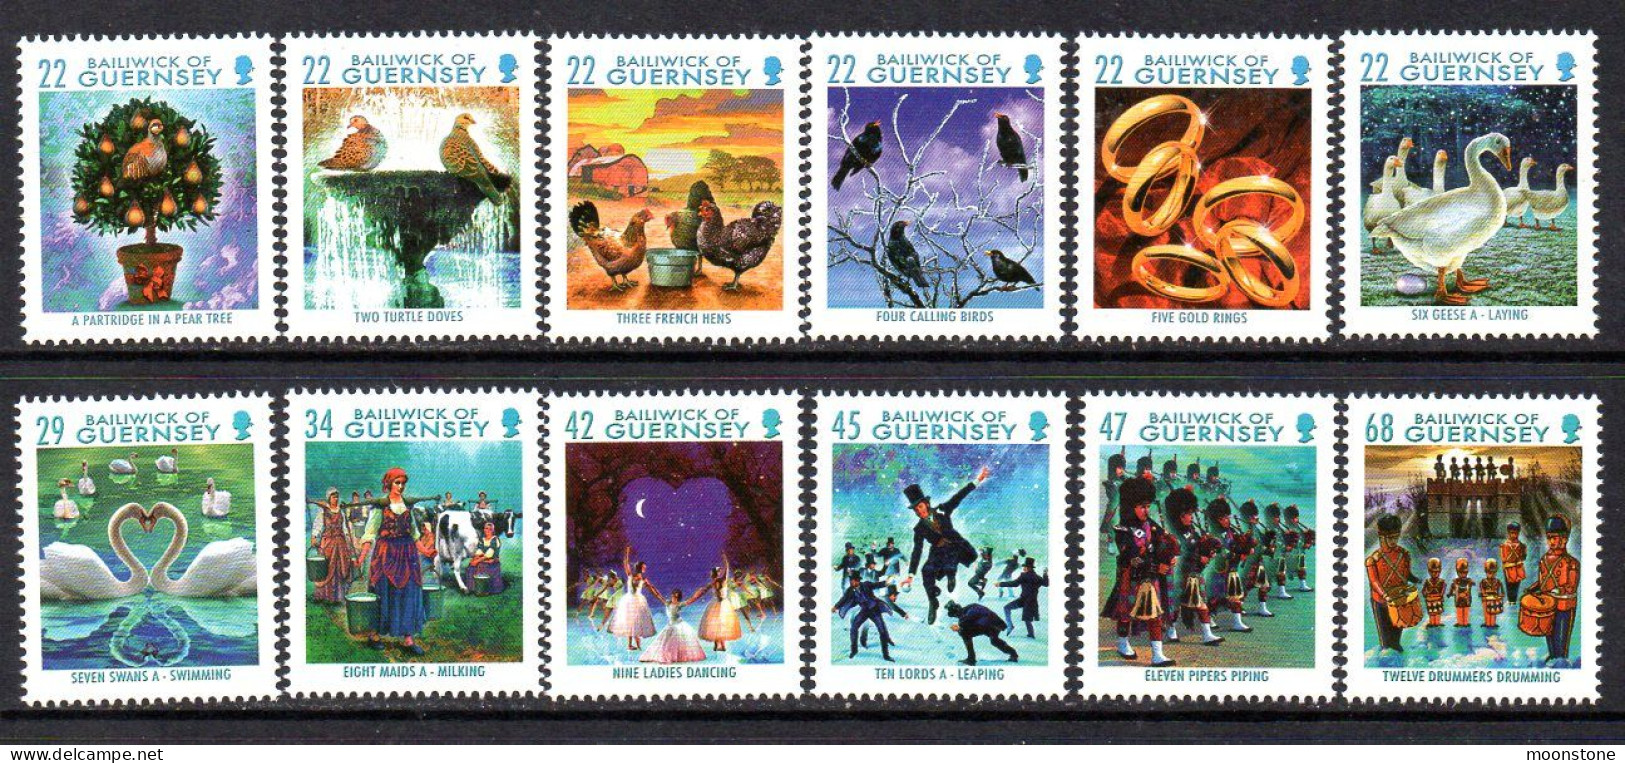 Guernsey 2006 Christmas, The 12 Days Of Christmas Set Of 12, MNH, SG 1130/41 - Guernesey